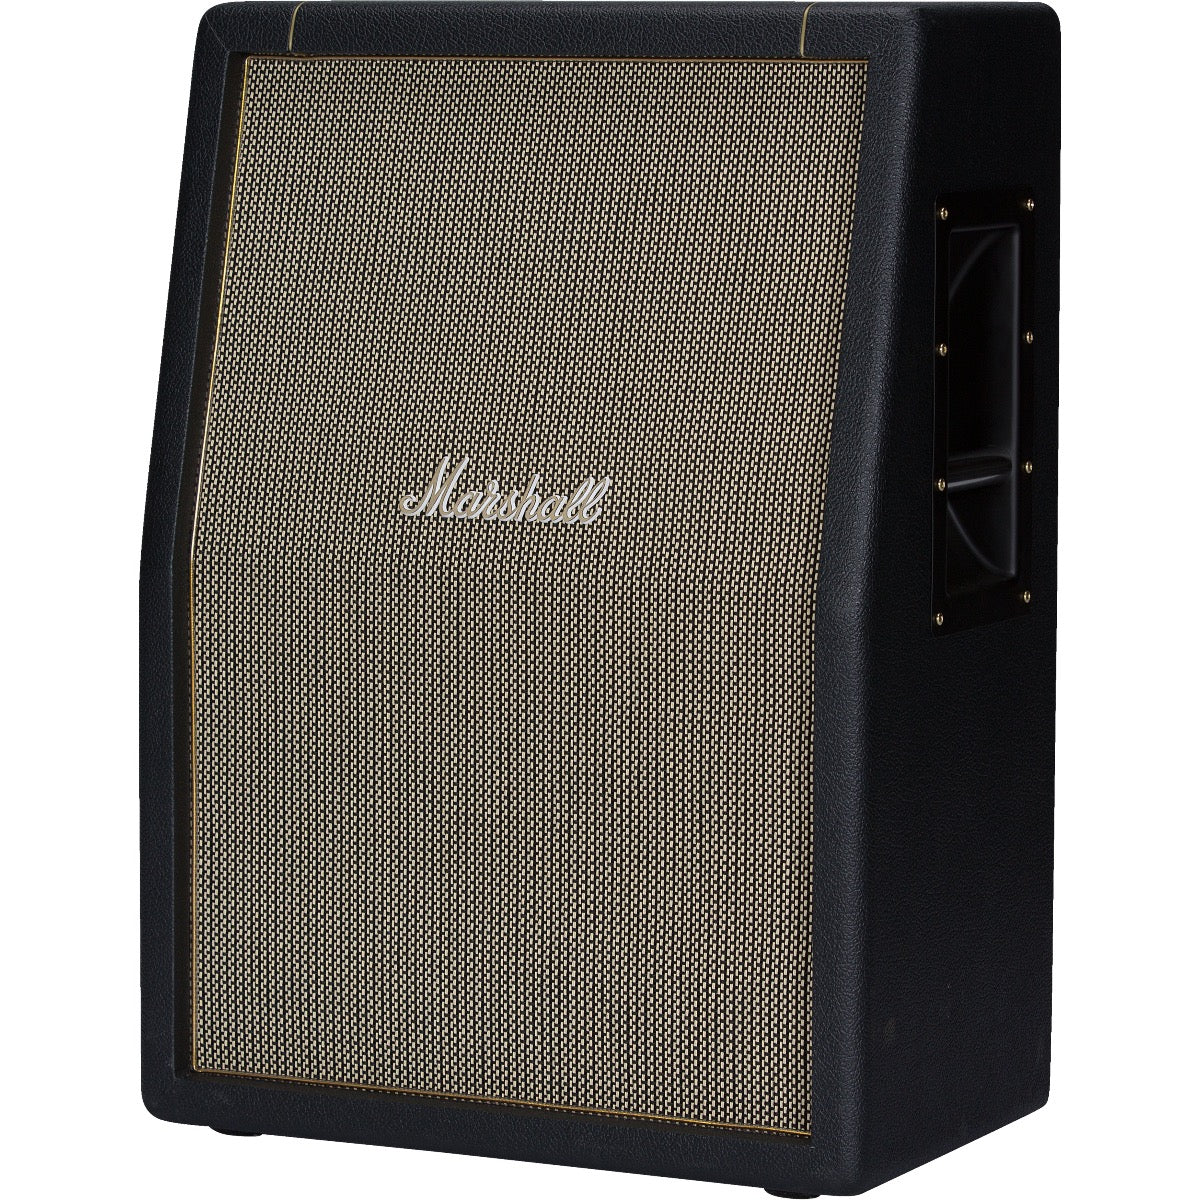 Perspective view of Marshall SV212 Studio Vintage 2x12 Angled Speaker Cabinet showing front and right side